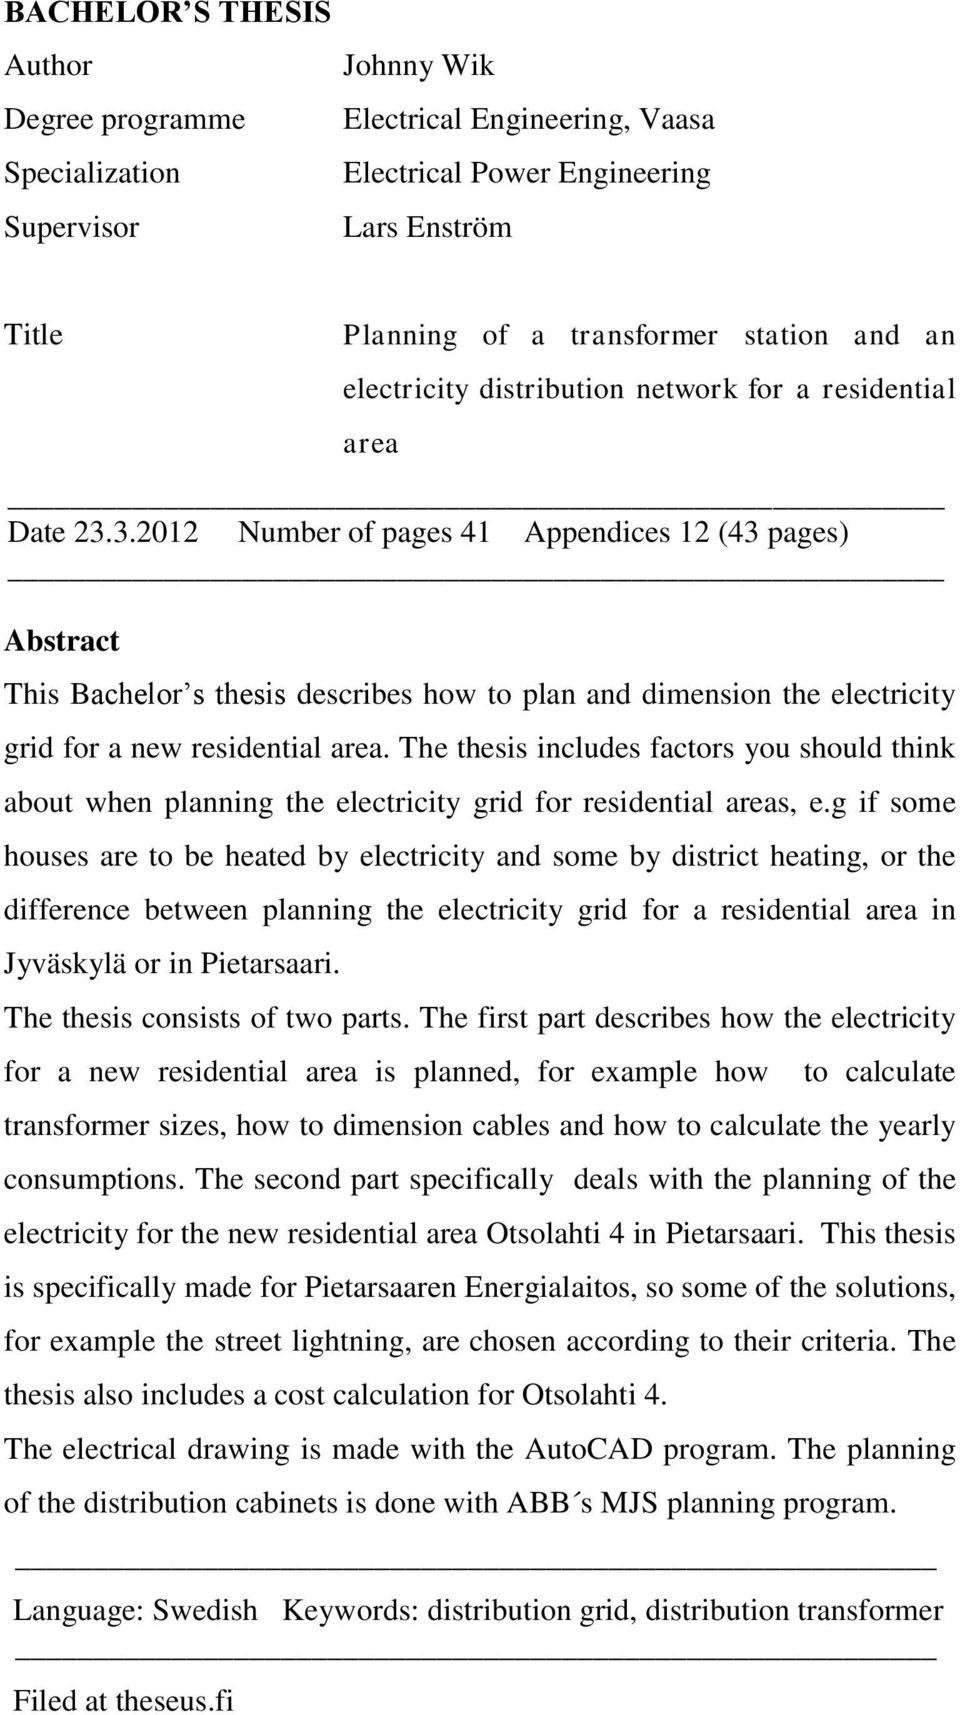 3.2012 Number of pages 41 Appendices 12 (43 pages) Abstract This Bachelor s thesis describes how to plan and dimension the electricity grid for a new residential area.